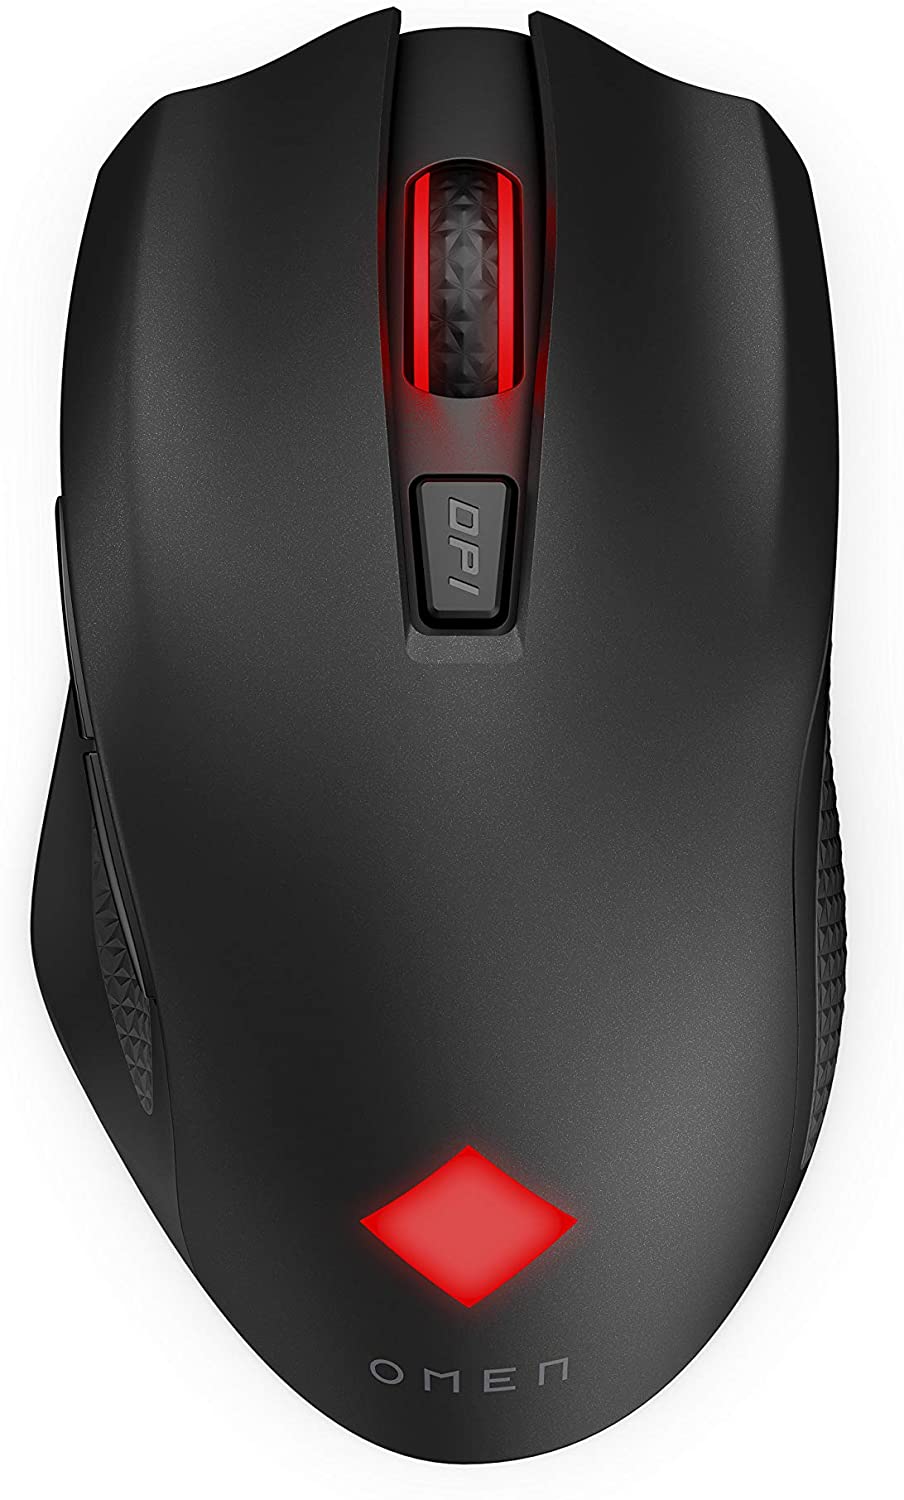 HP OMEN Vector Wireless Gaming Mouse $37.49 + Free Shipping